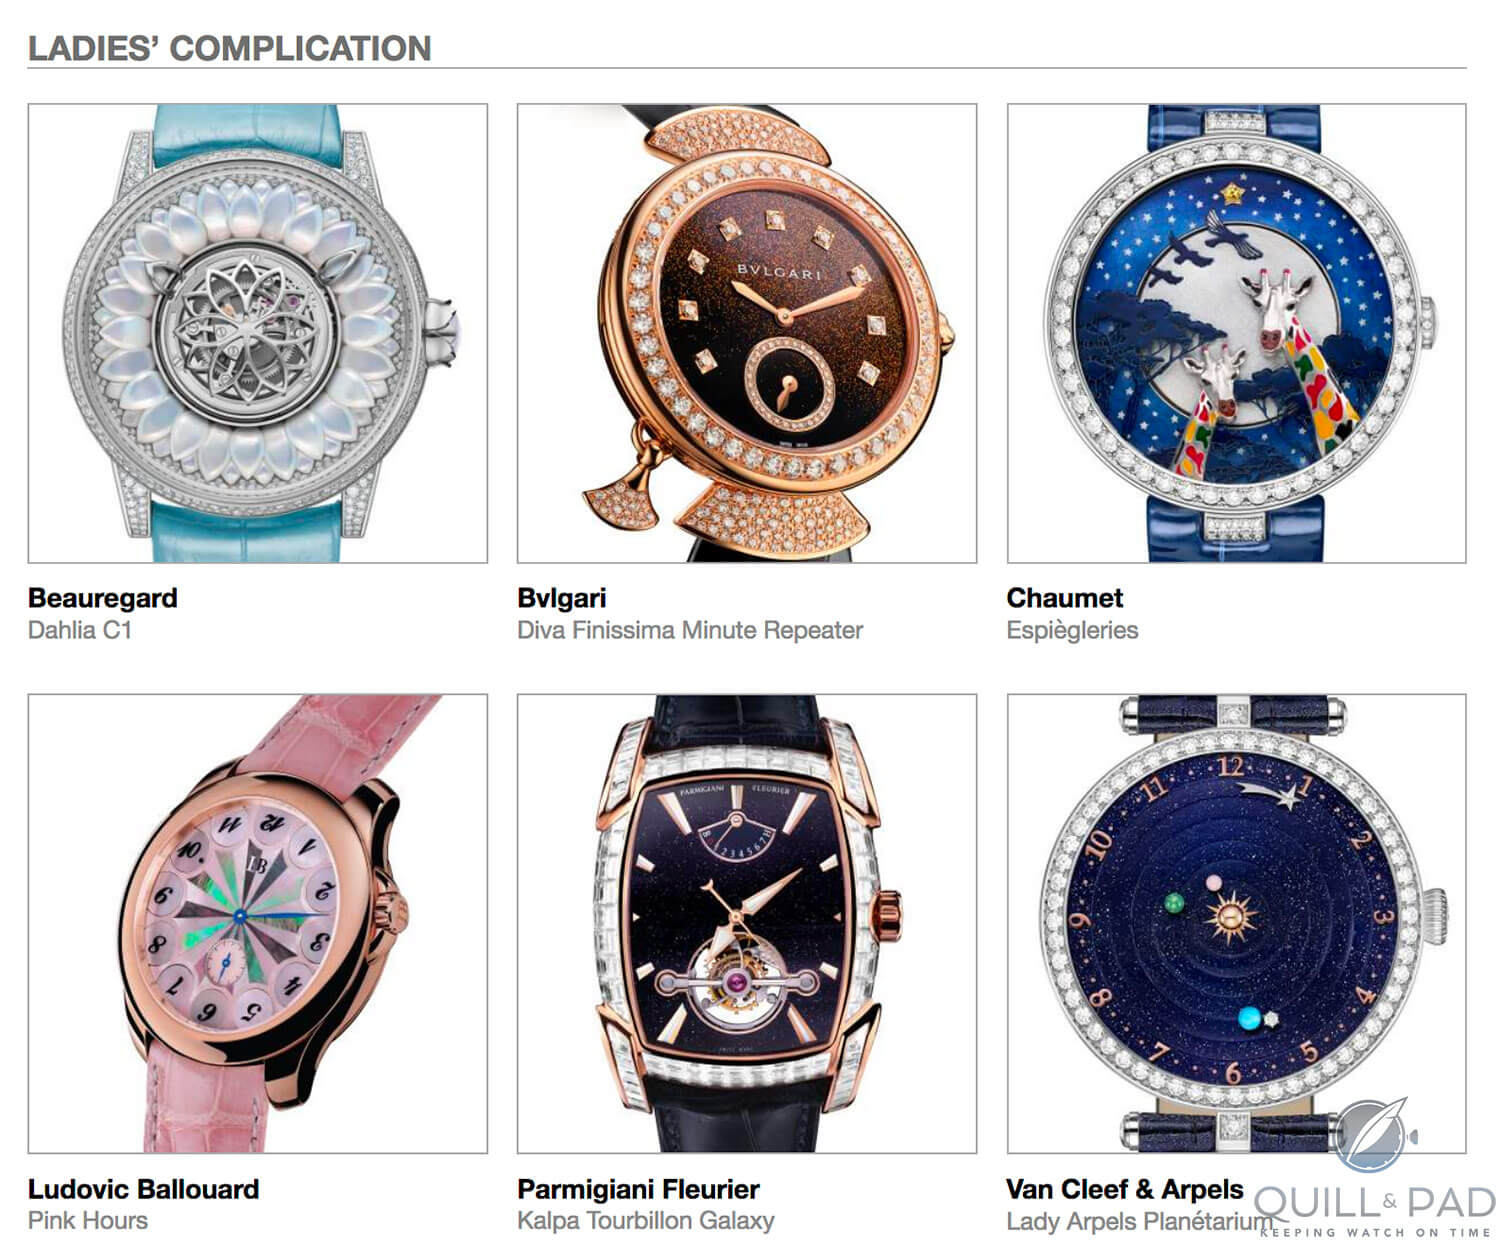 Ladies Complication category pre-selected watches in the 2018 GPHG, clockwise from top left: Beauregard Dahlia C1, Bulgari Diva Finissima Minute Repeater, Chaumet Espiègleries, Ludovic Ballouard Pink Hours, Parmigiani Fleurier Kalpa Tourbillon Galaxy, and Van Cleef & Arpels Lady Arpels Planétarium 